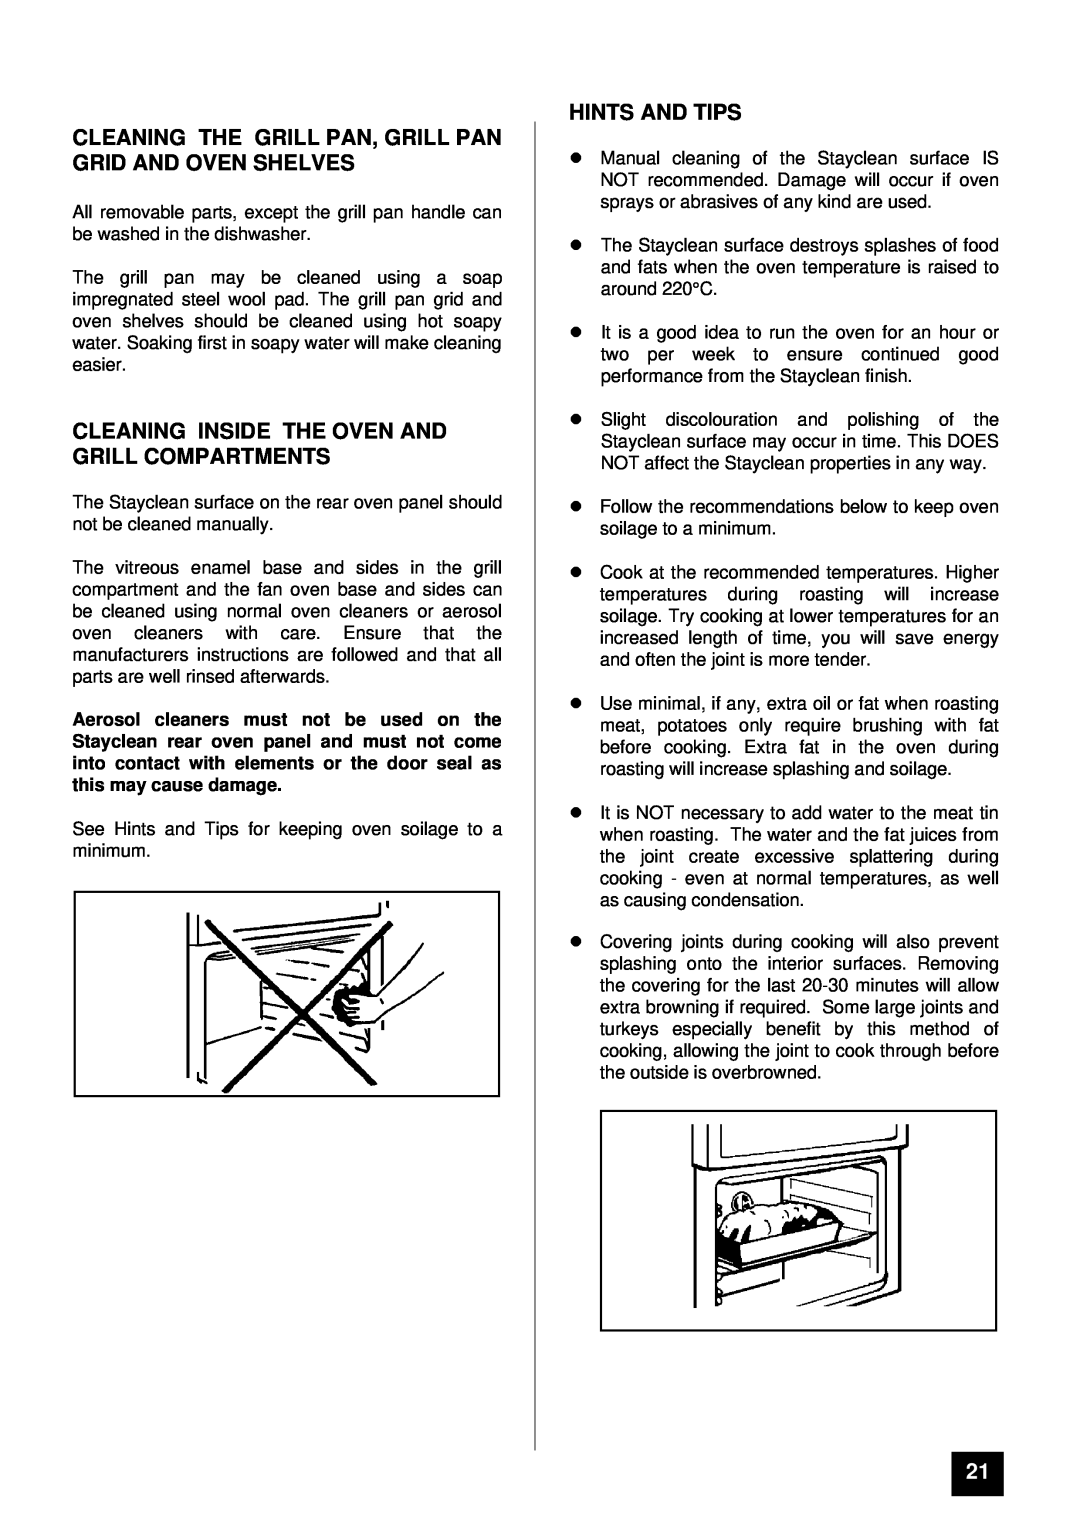 Tricity Bendix RE50M installation instructions Cleaning The Grill Pan, Grill Pan Grid And Oven Shelves, Hints And Tips 